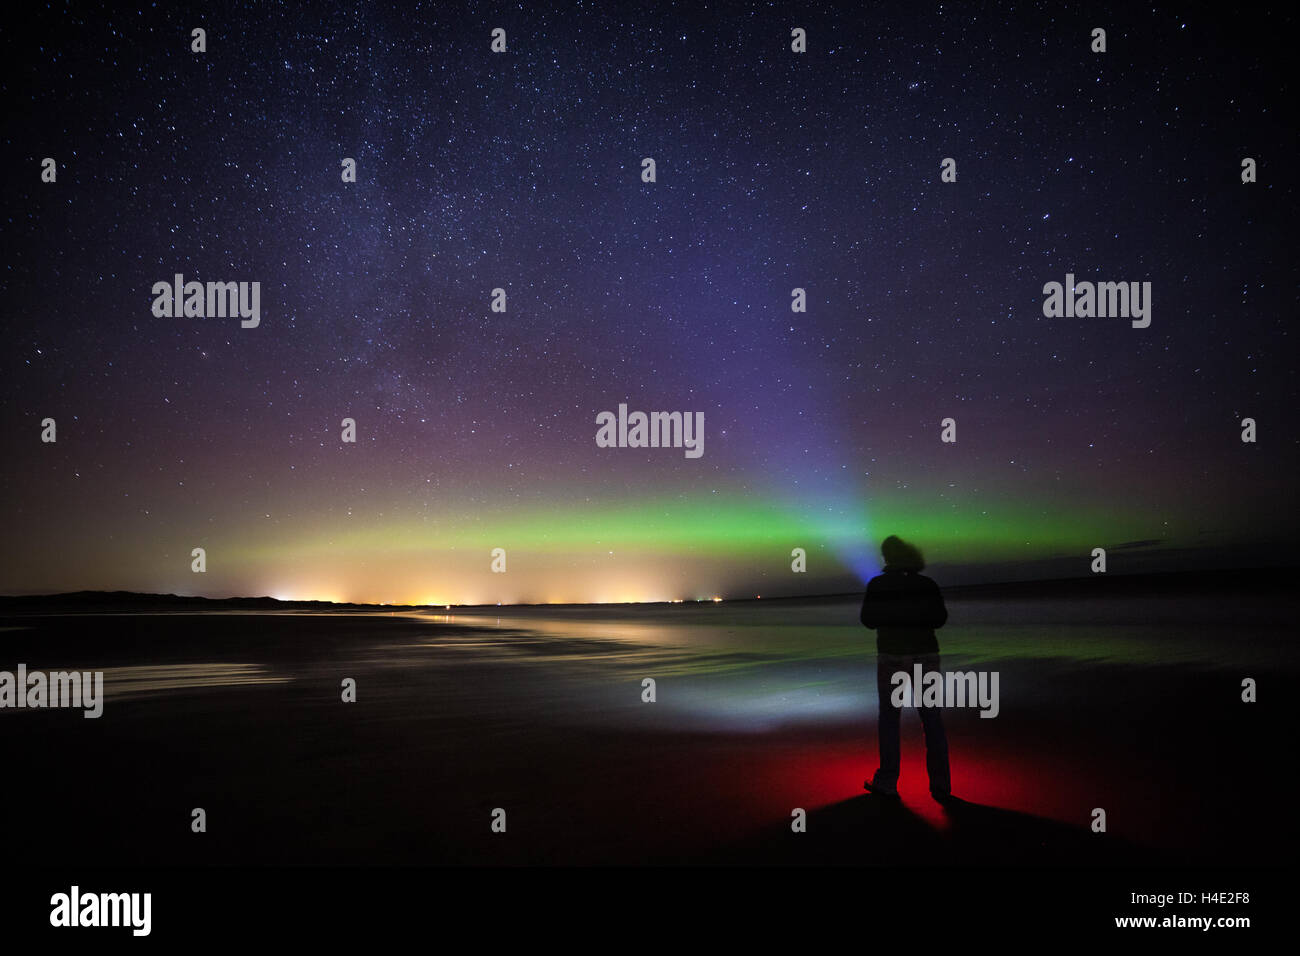 A lone woman shining a torch up at the night sky with the Milky Way and Aurora Borealis, the Northern Lights, from the beach Stock Photo